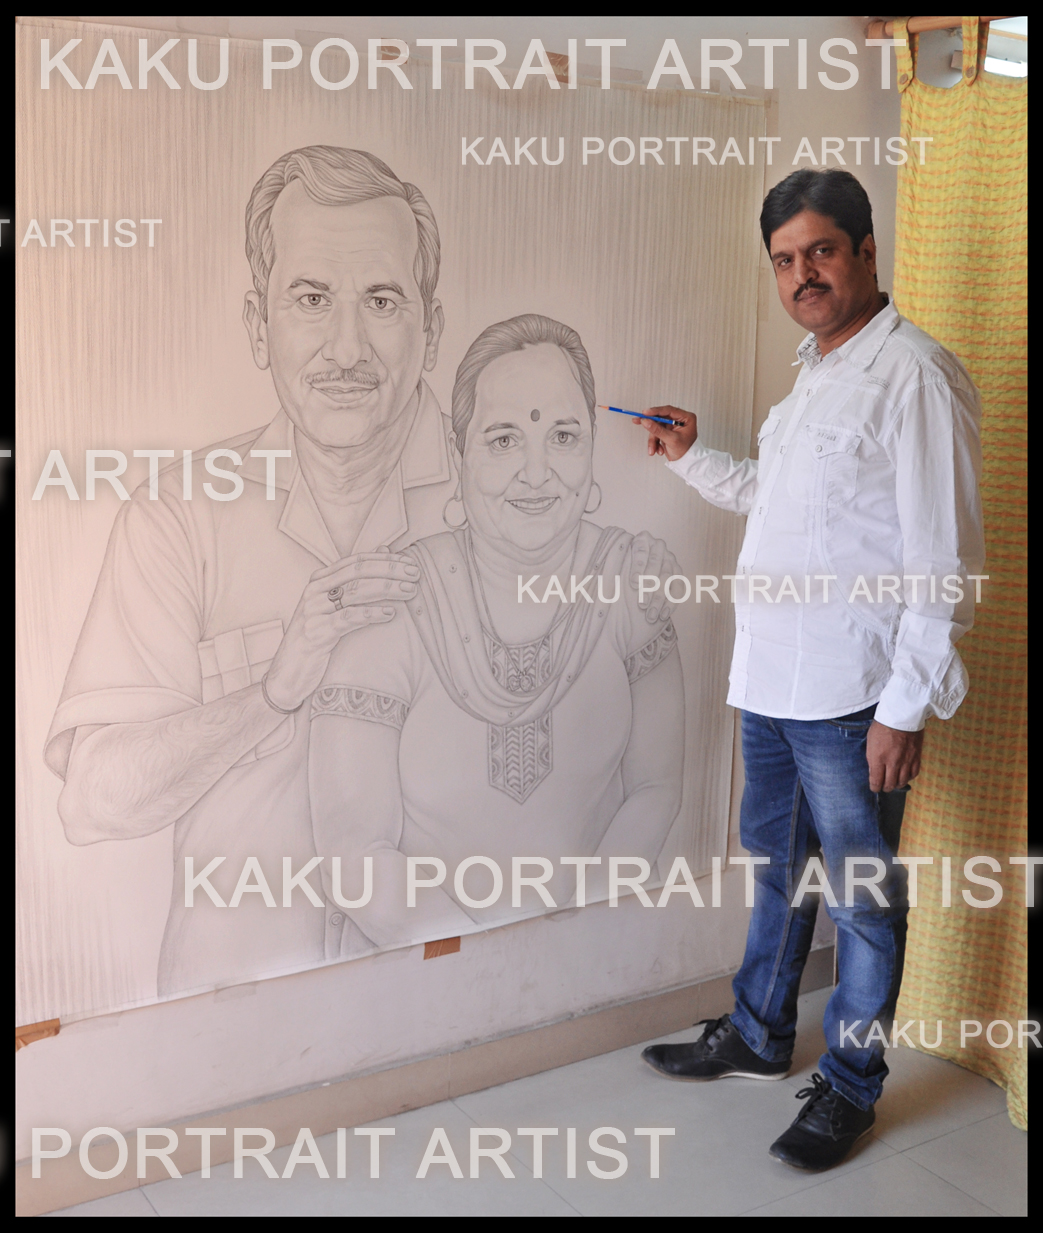 HOME TUTOR FOR ALL AGES- LEARN SKETCHING, DRAWING, PAINTING, FINE ART BASICS- 9899146678